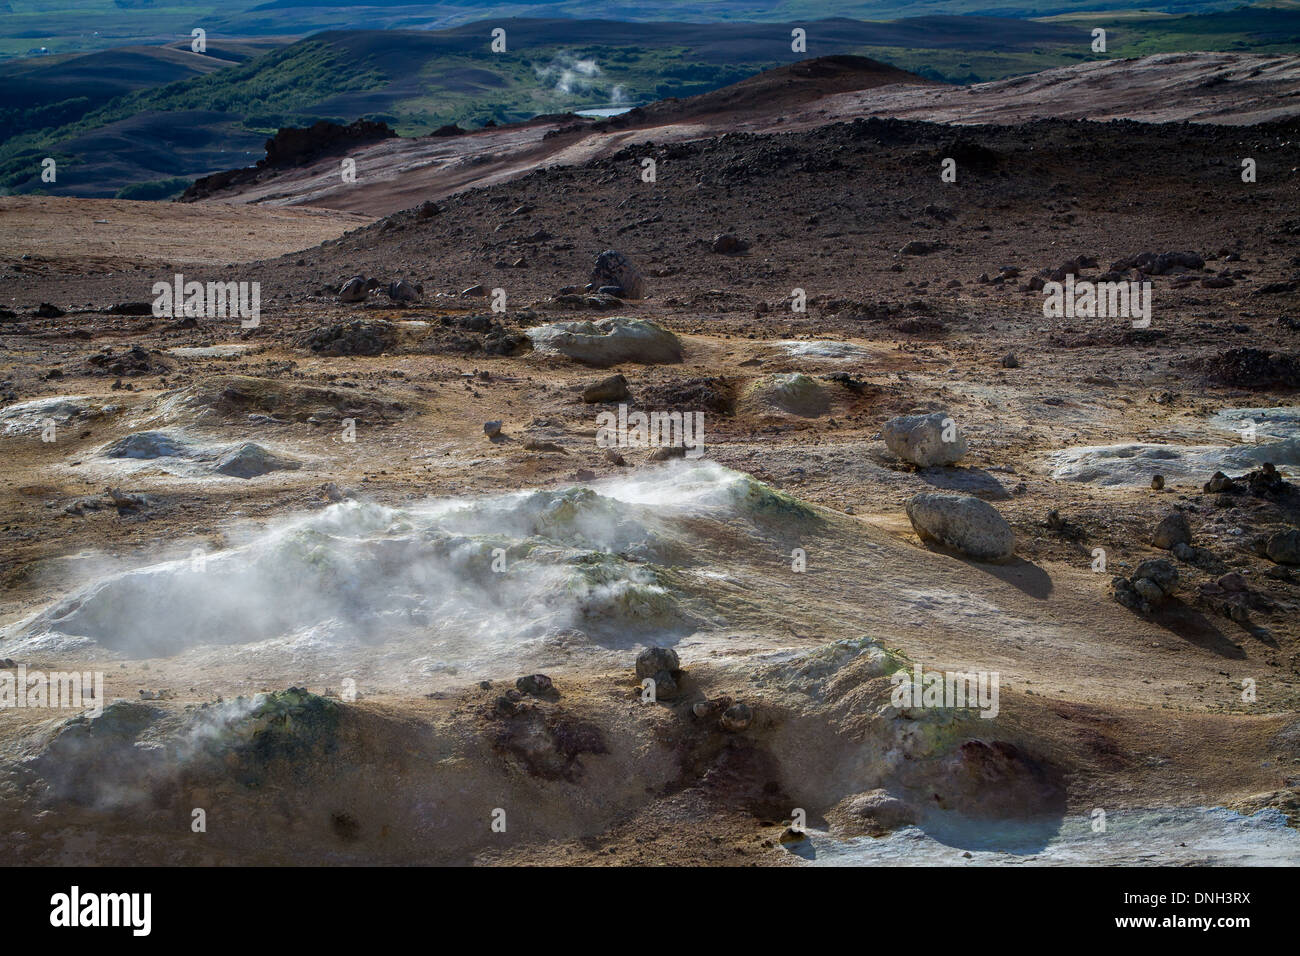 GEOTHERMAL ZONE OF NAMAFJALL, VOLCANIC BULGE NEAR LAKE MYVATN, IN THE VOLCANIC SYSTEM OF KRAFLA, A VAST AND SANDY ZONE COLOURED BY SULFUR AND DEPOSITS OF DIVERSE COLOURS, NORTHERN ICELAND, EUROPE Stock Photo